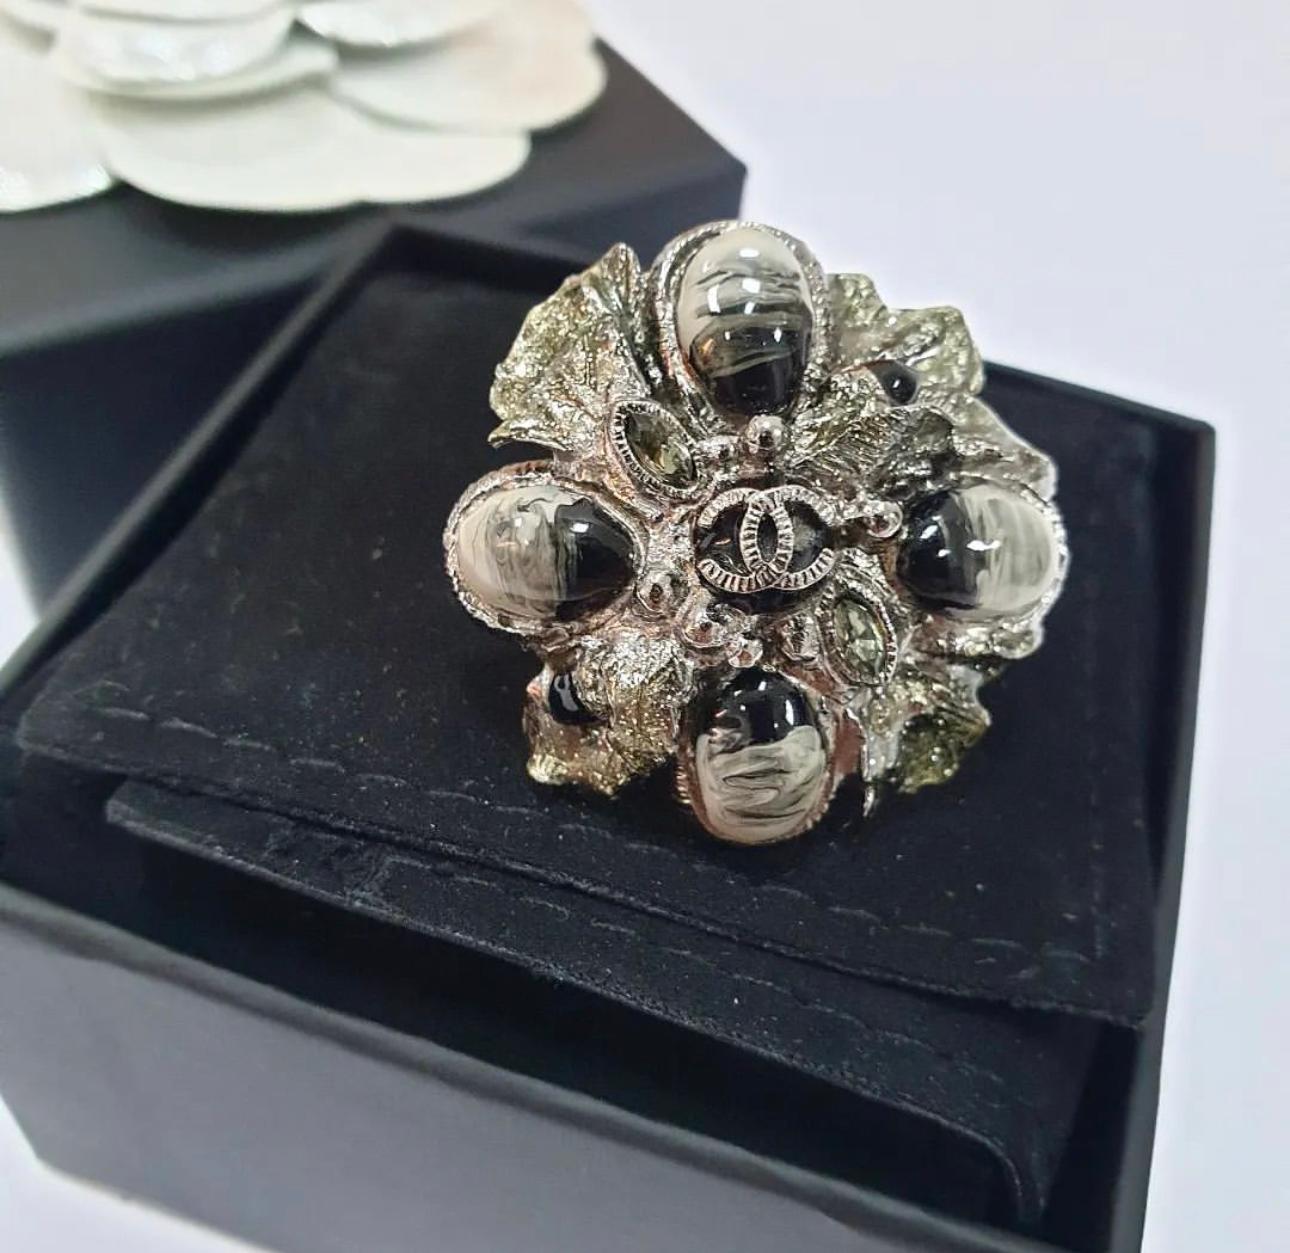 This fabulous ring features gunmetal colored metal with a small CC logo in the center and a painted enamel flower design. 
A fabulous accessory for any Chanel lover!

Size 17-17.5

100% AUTHENTIC

Comes with box.